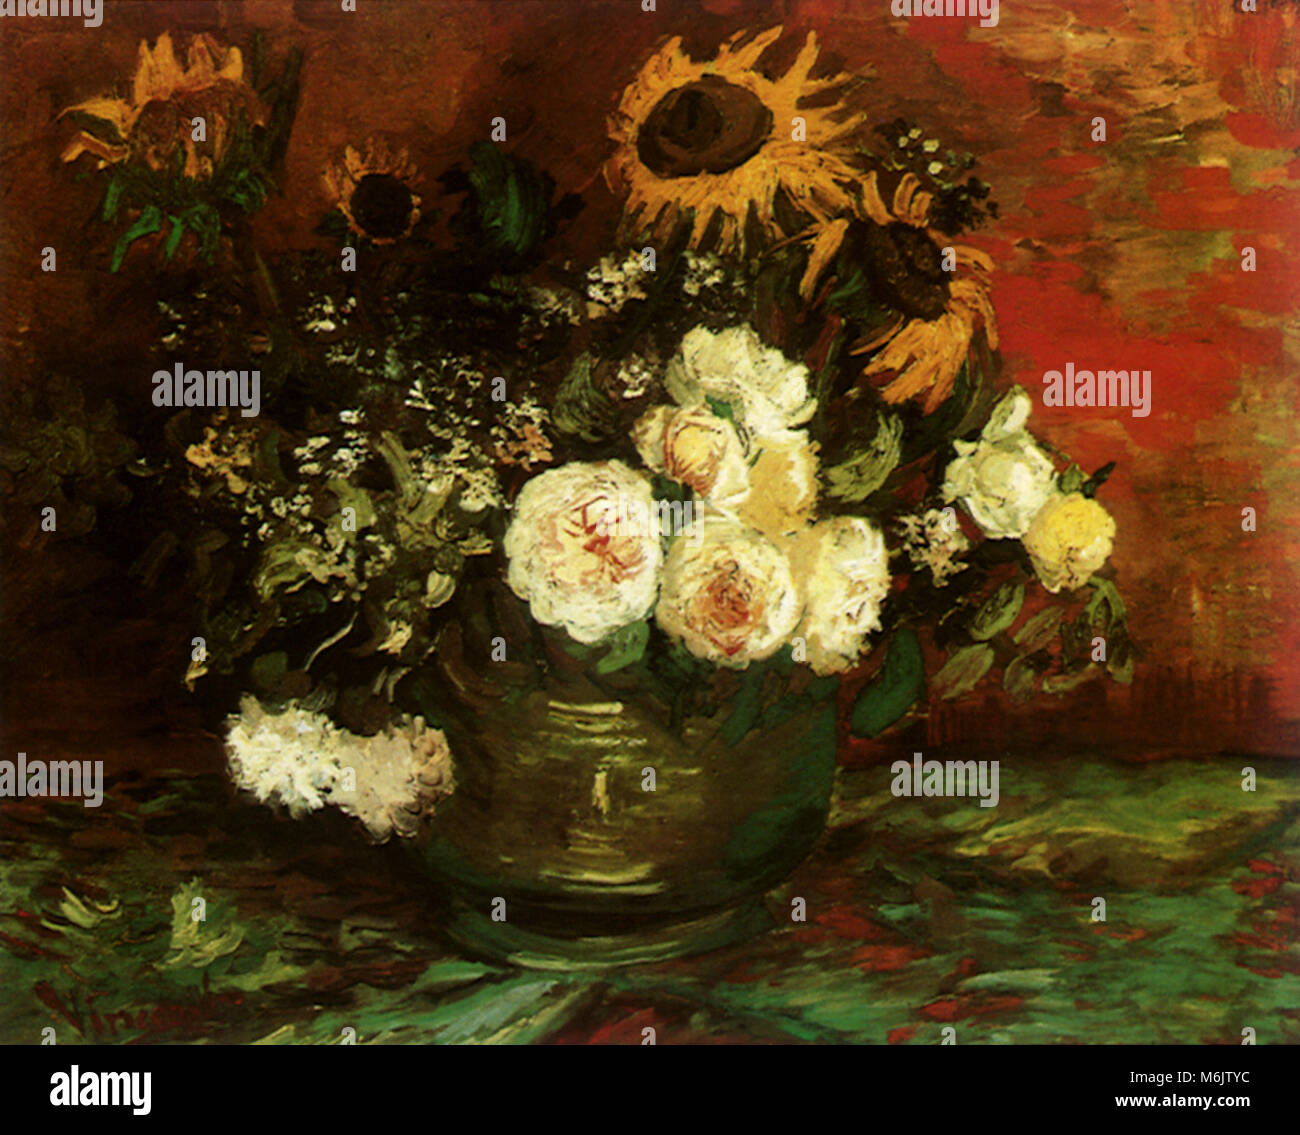 Bowl with Sunflowers, Roses and Other Flowers, Van Gogh, Vincent Willem, 1886. Stock Photo